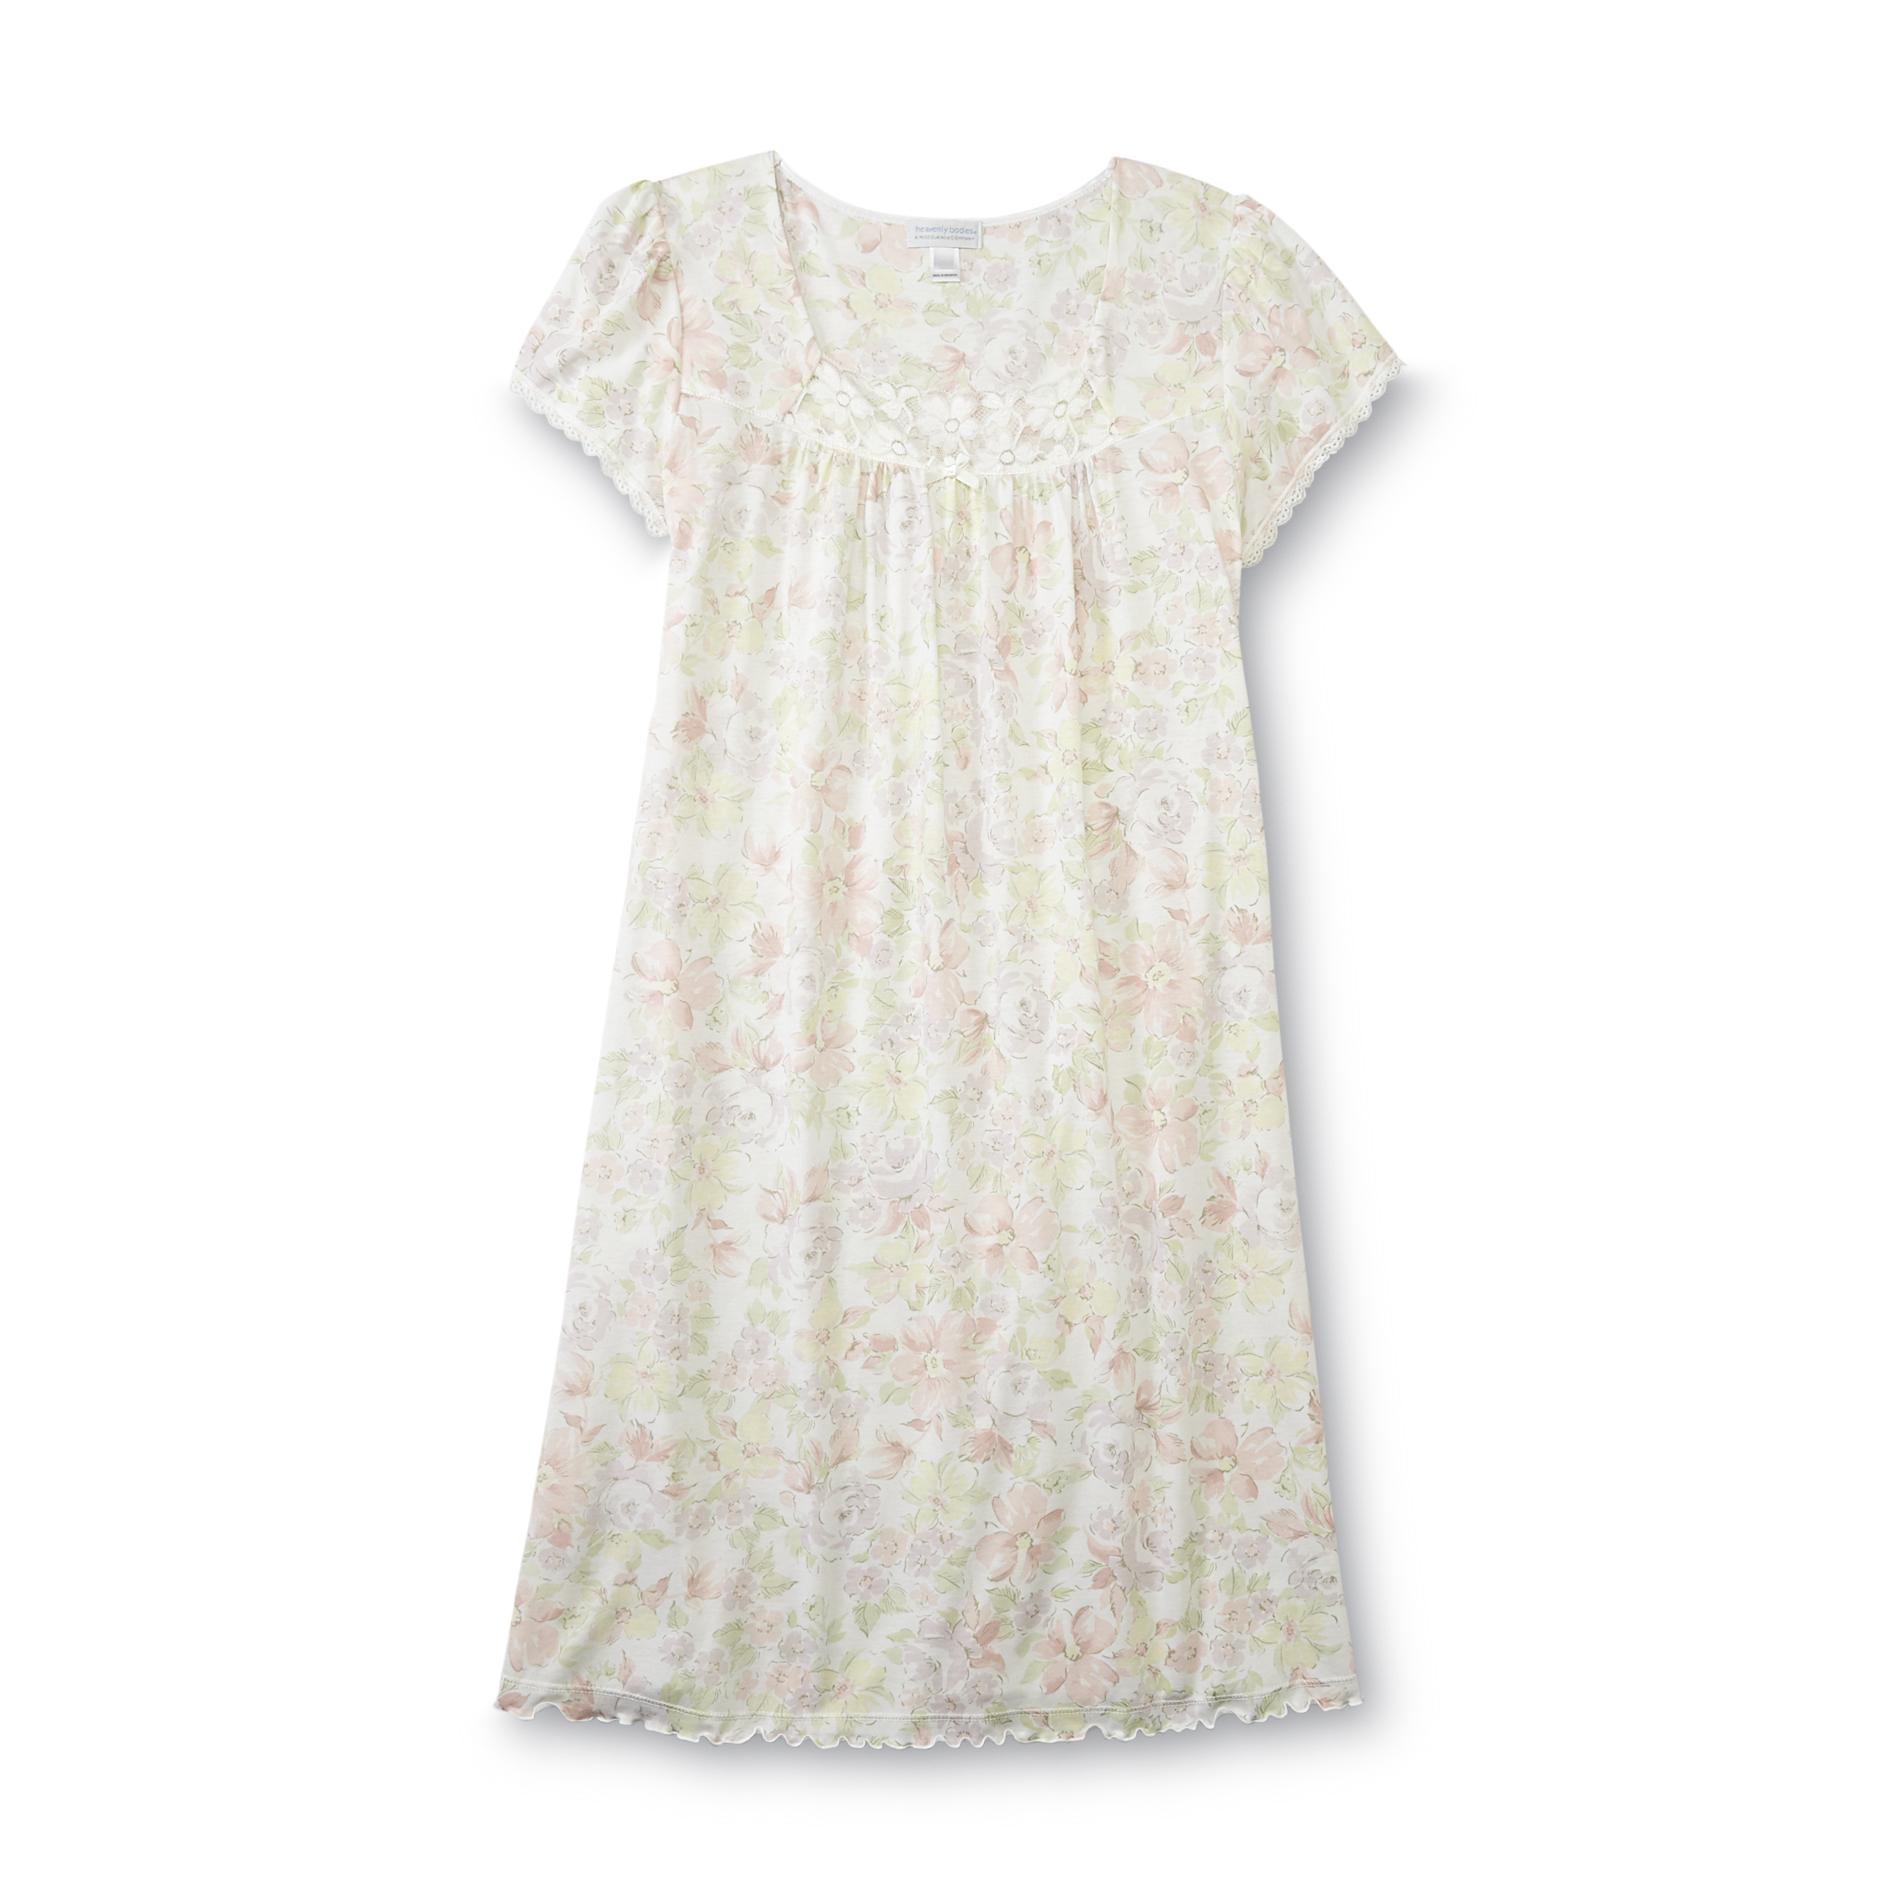 Heavenly Bodies by Miss Elaine Women's Nightgown - Floral